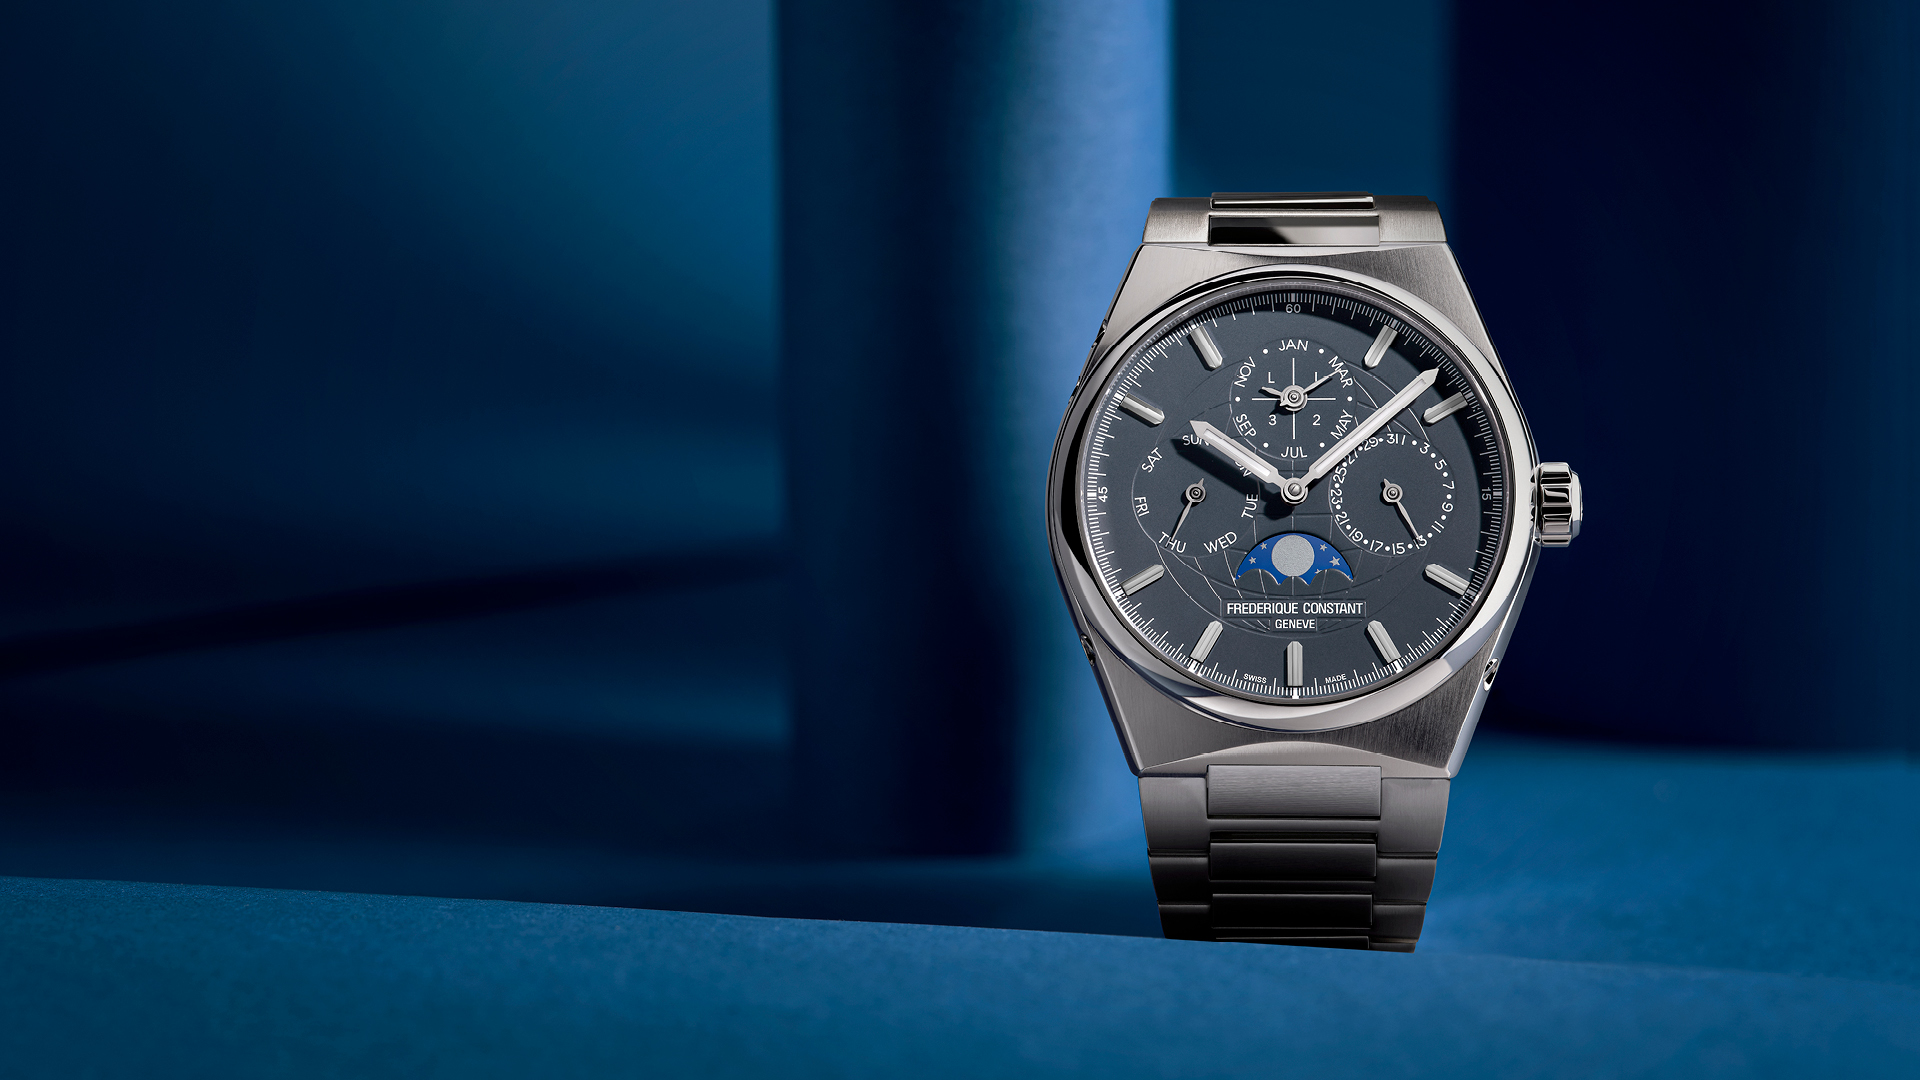 Highlife Perpetual Calendar Manufacture watch for man.   Automatic movement, blue-grey dial, stainless-steel case, date, month and day counters, moonphase and stainless-steel integrated and interchangeable bracelet 